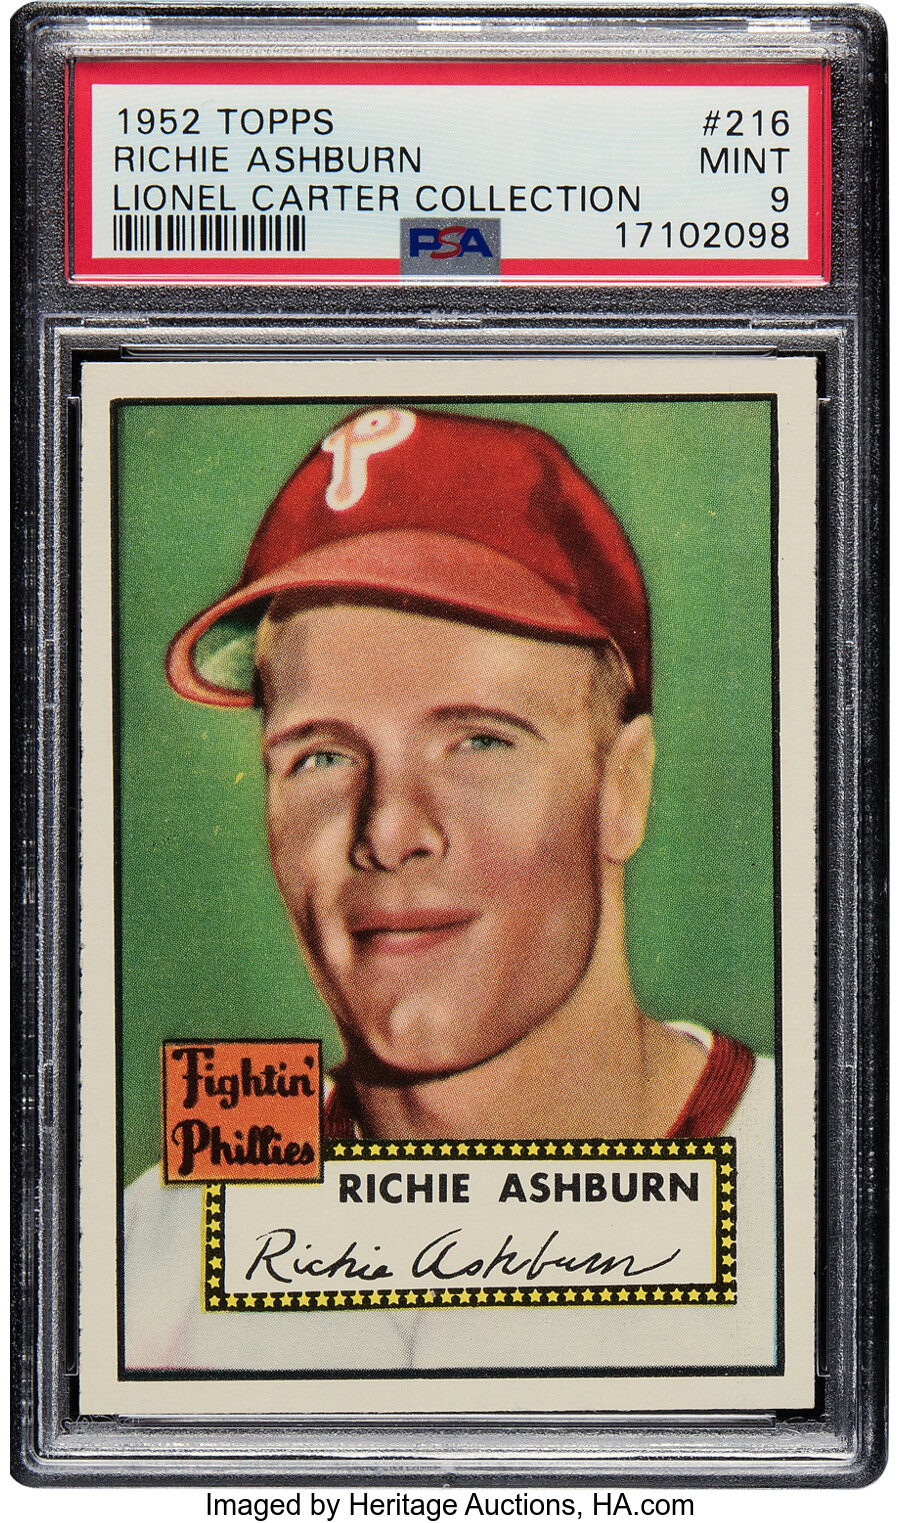 1952 Topps Richie Ashburn #216 PSA Mint 9 - None Superior! From the Lionel Carter Collection